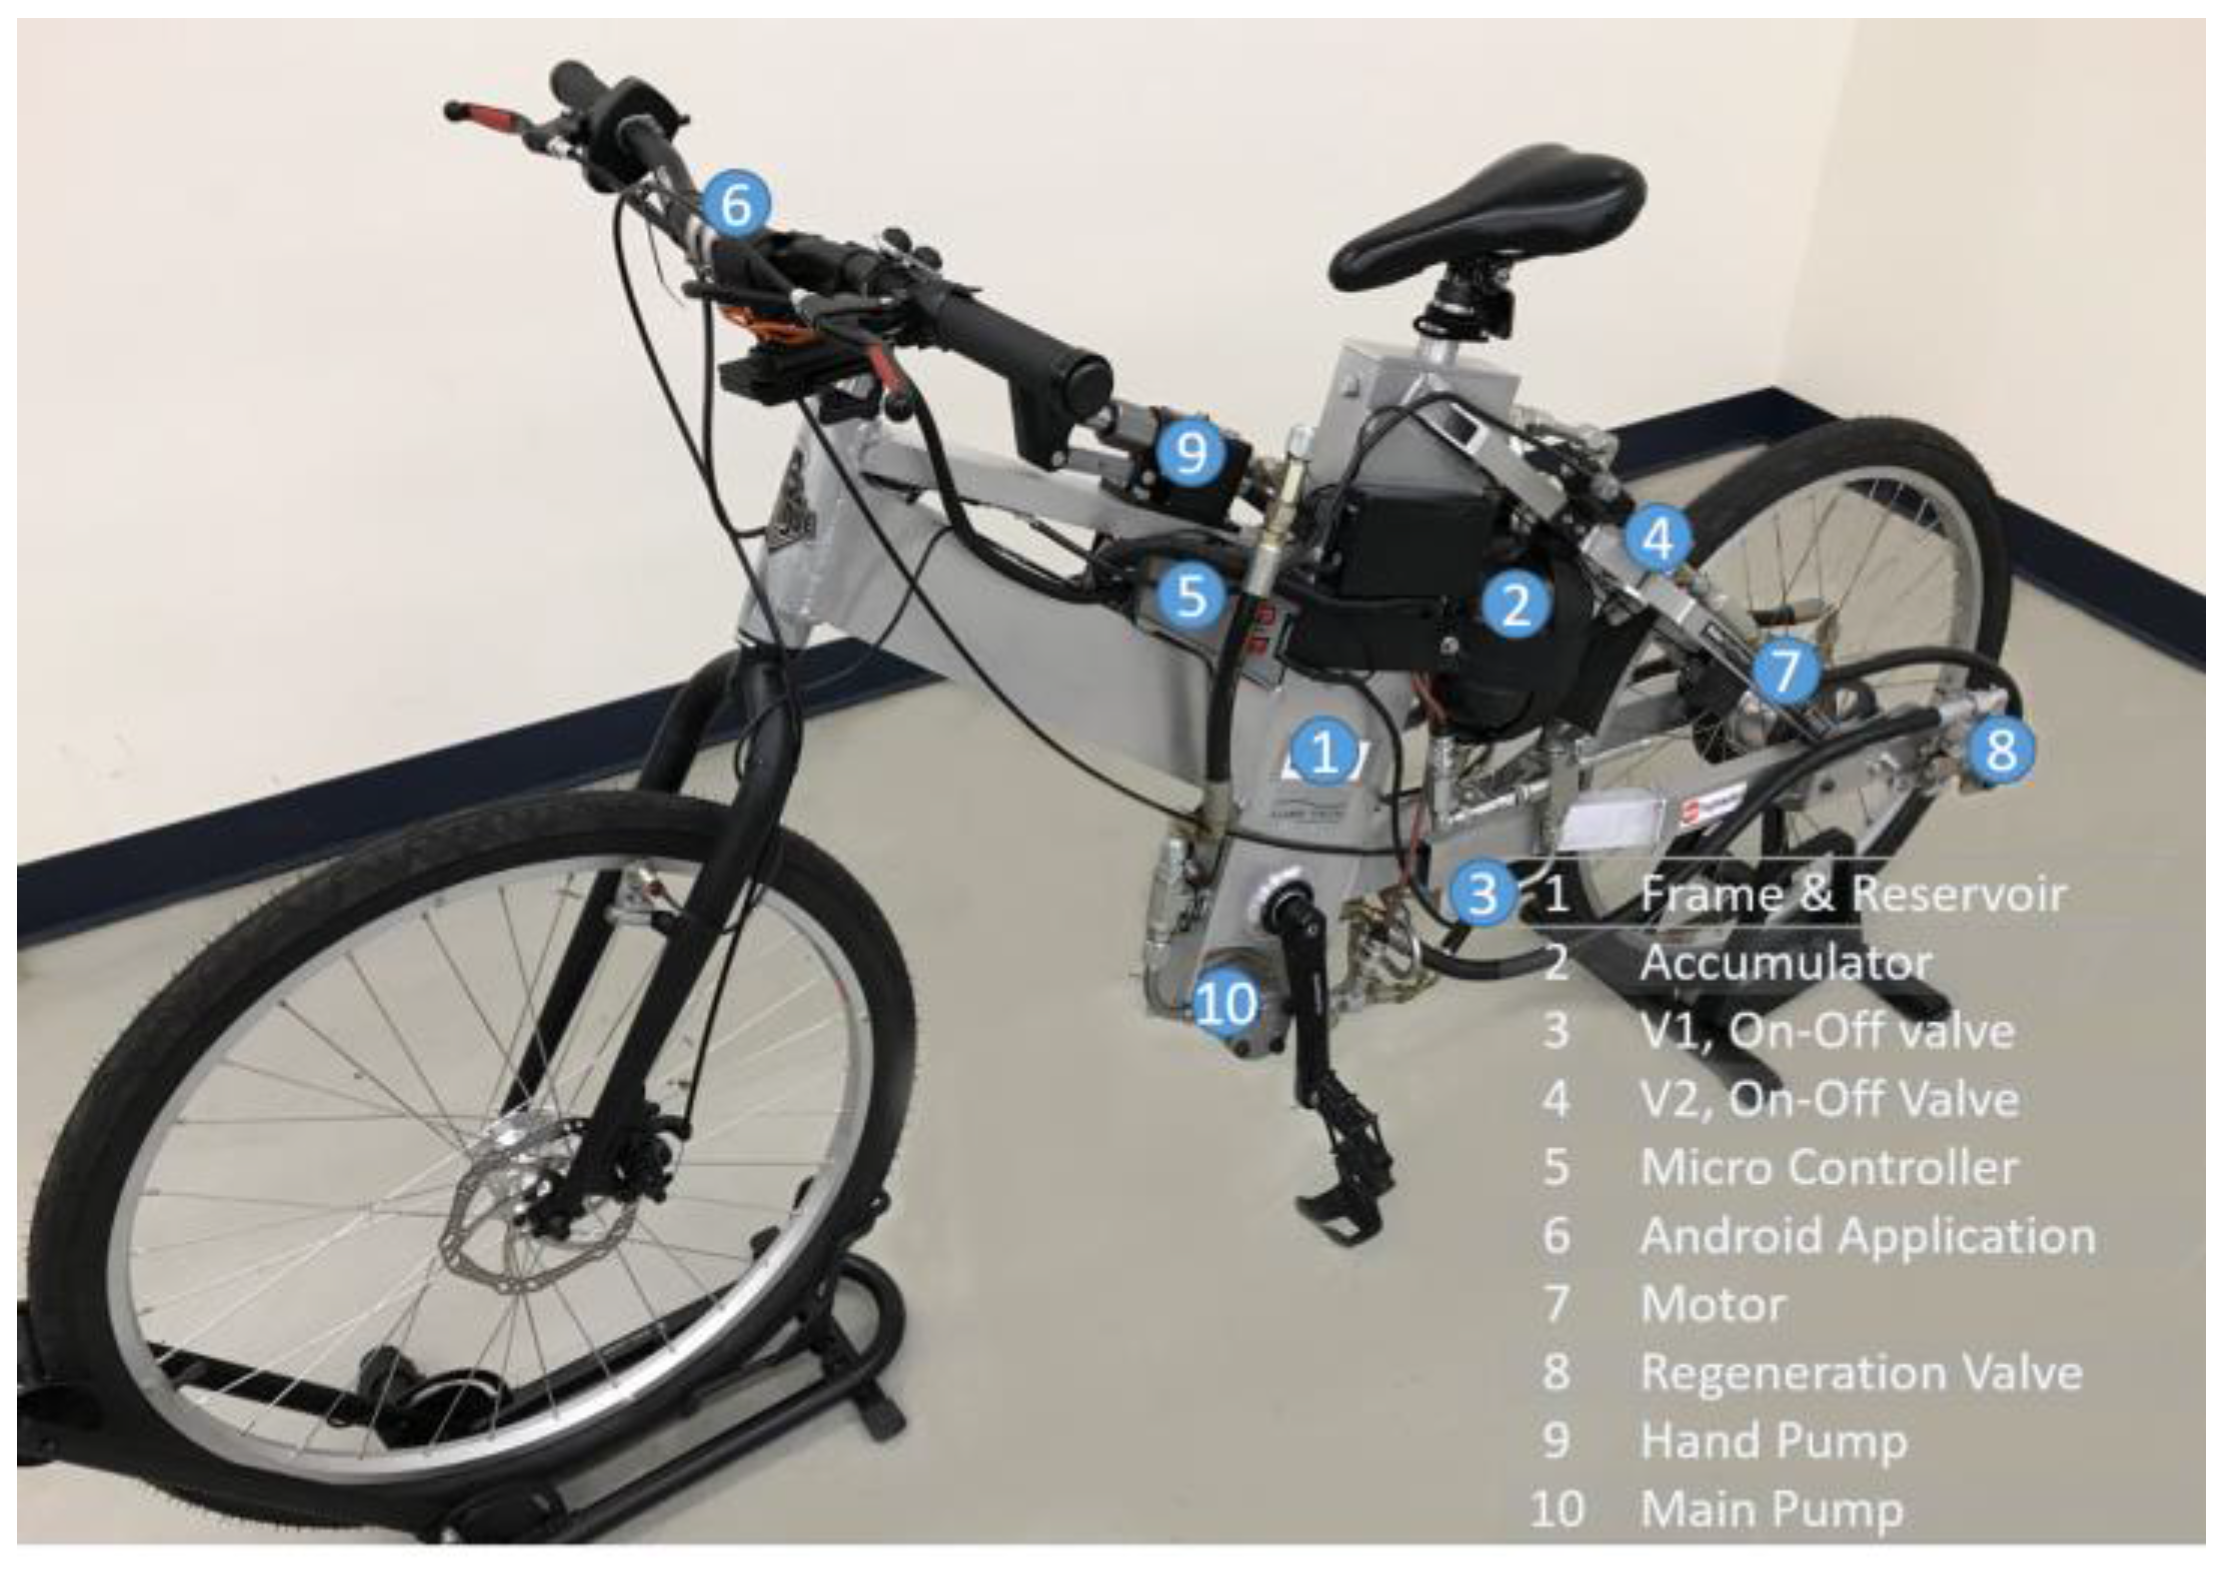 Energies | Free Full-Text | The PurdueTracer: An Energy-Efficient  Human-Powered Hydraulic Bicycle with Flexible Operation and Software Aids